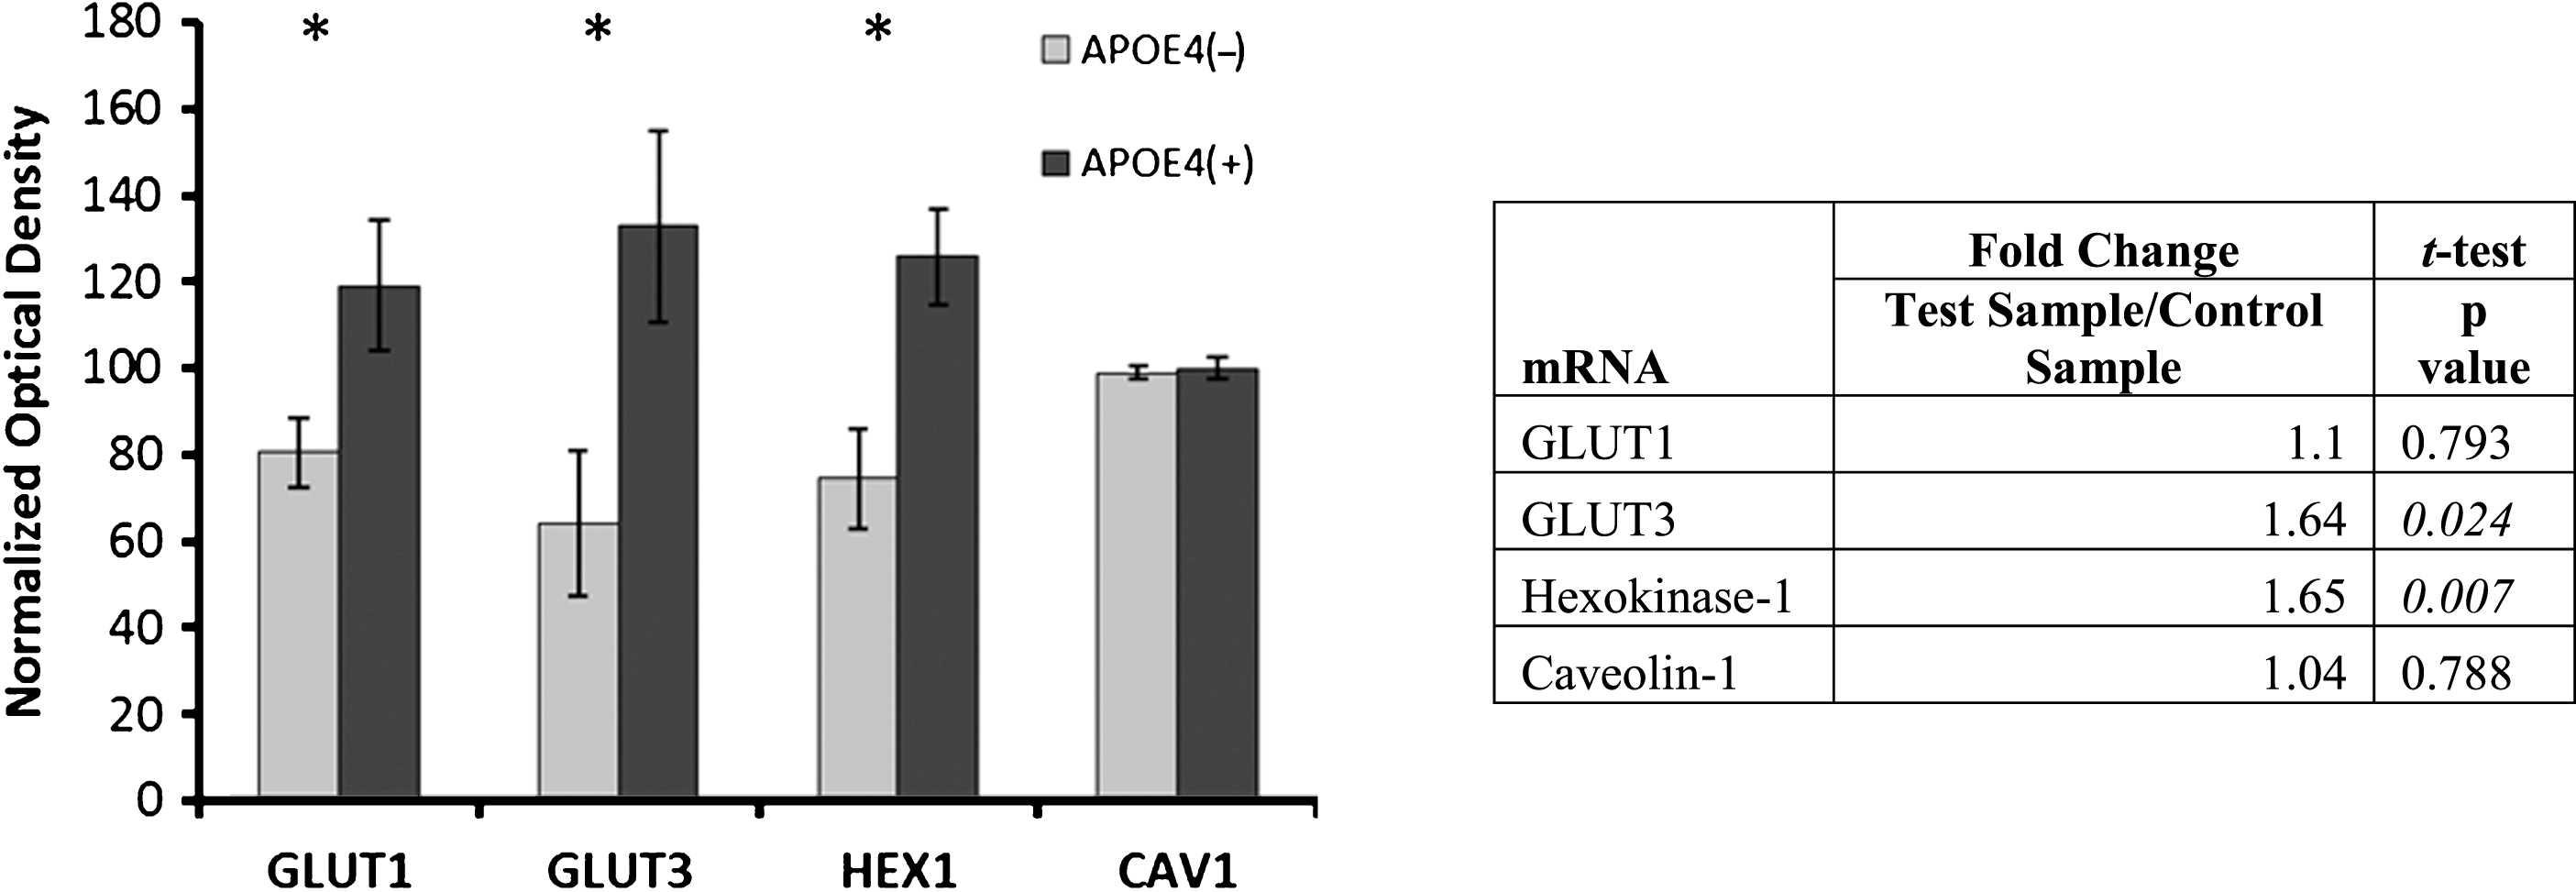 Alterations in glucose metabolism in APOE4 carriers. Western blot results demonstrating significantly higher protein levels of glucose metabolism proteins in APOE4 carriers, except CAV1 (normalized mean±SEM). mRNA transcripts for GLUT3 and hexokinase-1 were shown to be increased in qPCR analysis (table right); GLUT1 and caveolin-1 were not significantly higher in the qPCR analysis. GLUT1, GLUT3, glucose transporters; HEX1, hexokinase-1; CAV1, caveolin-1. APOE4(+), carriers; APOE4(–), non-carriers. * p < 0.0375 (Benjamini-Hochberg adjusted significance level), 2-tailed Student’s t-test.